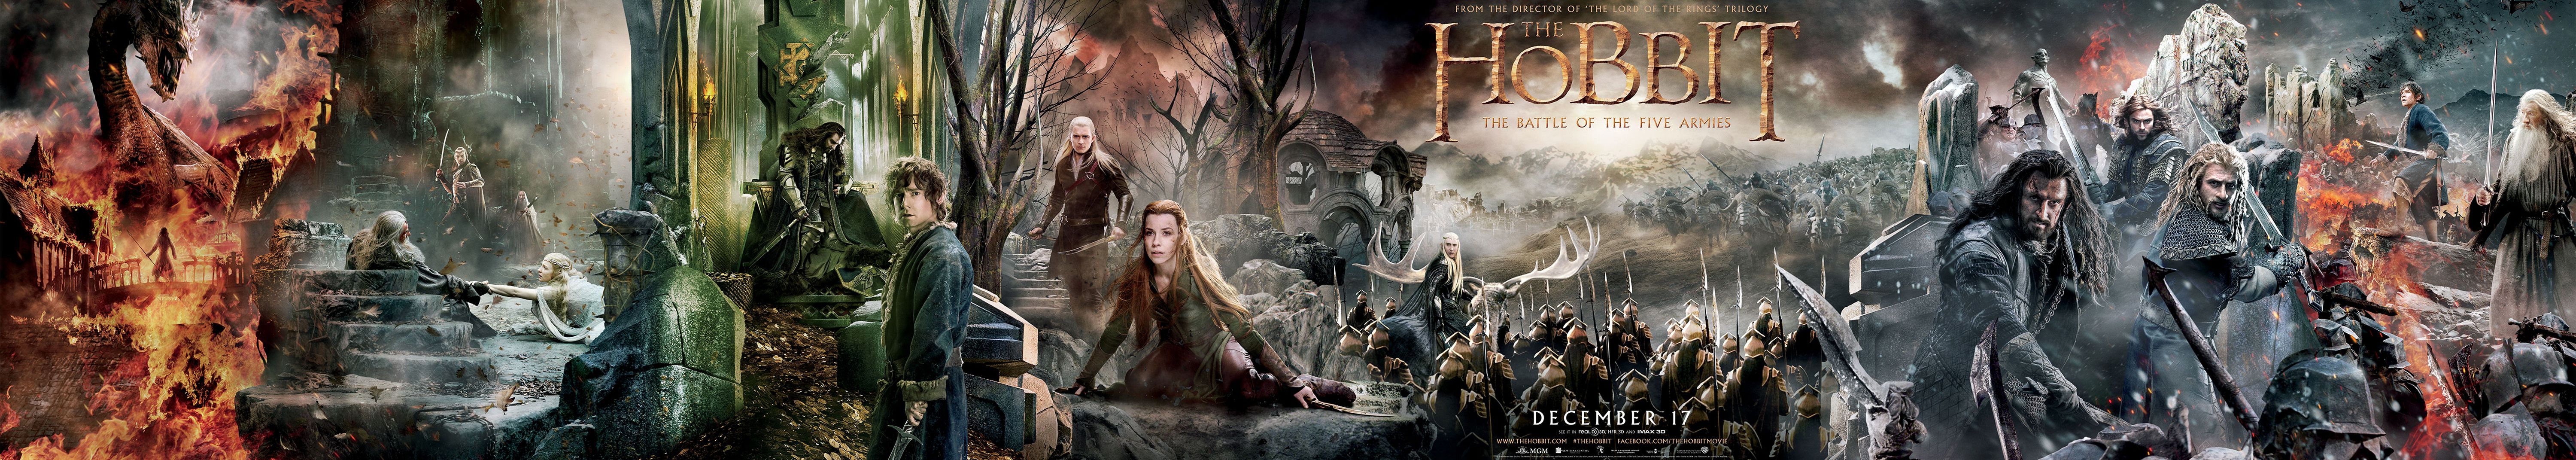 Ultra-wide The Hobbit: The Battle of the Five Armies banner